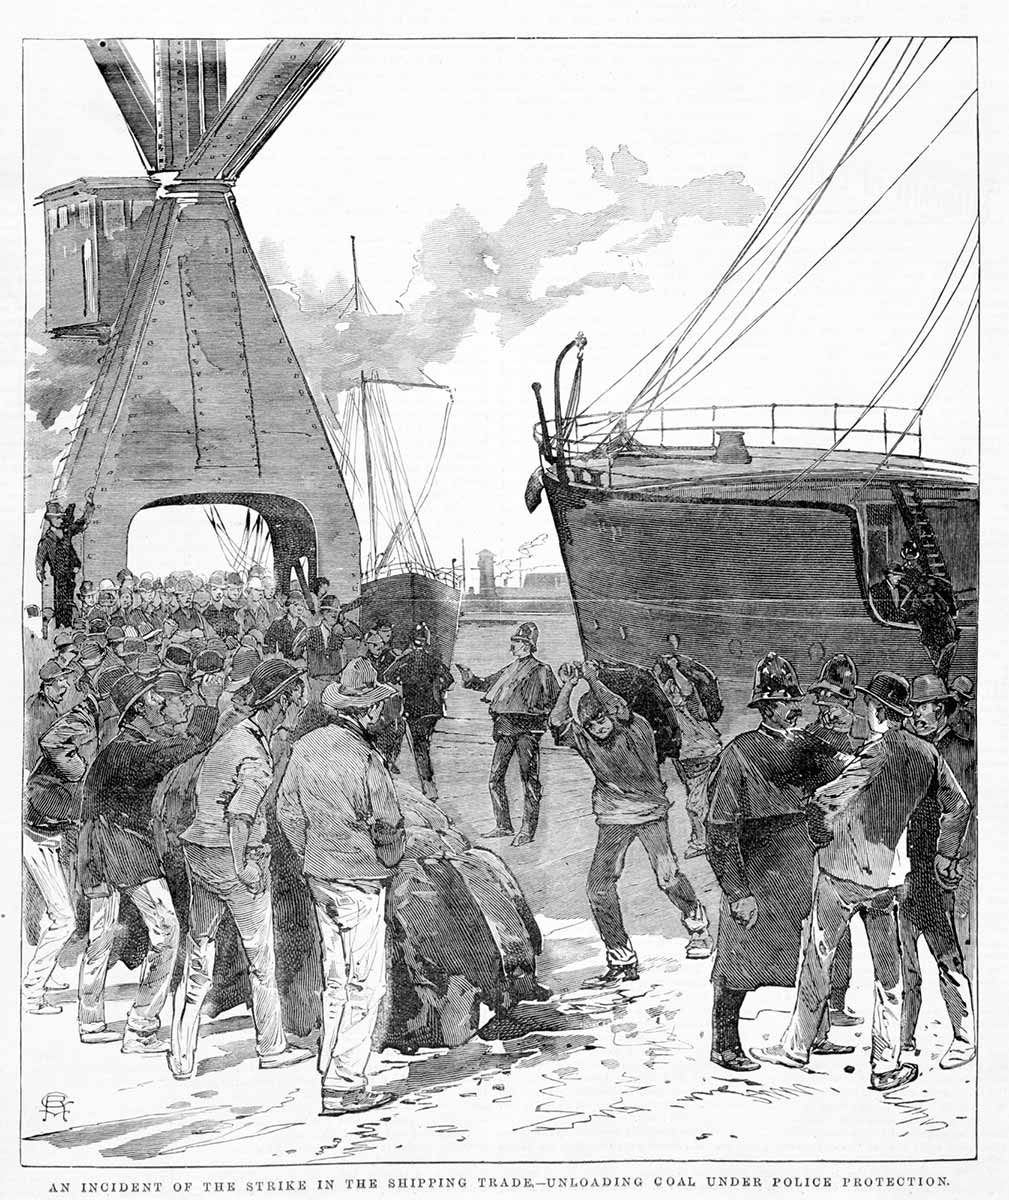 Black and white illustration depicting a wharf labourers protesting as police stand by. Printed text at the bottom reads  'AN INCIDENT OF THE STRIKE IN THE SHIPPING TRADE - UNLOADING COAL UNDER POLICE PROTECTION'.